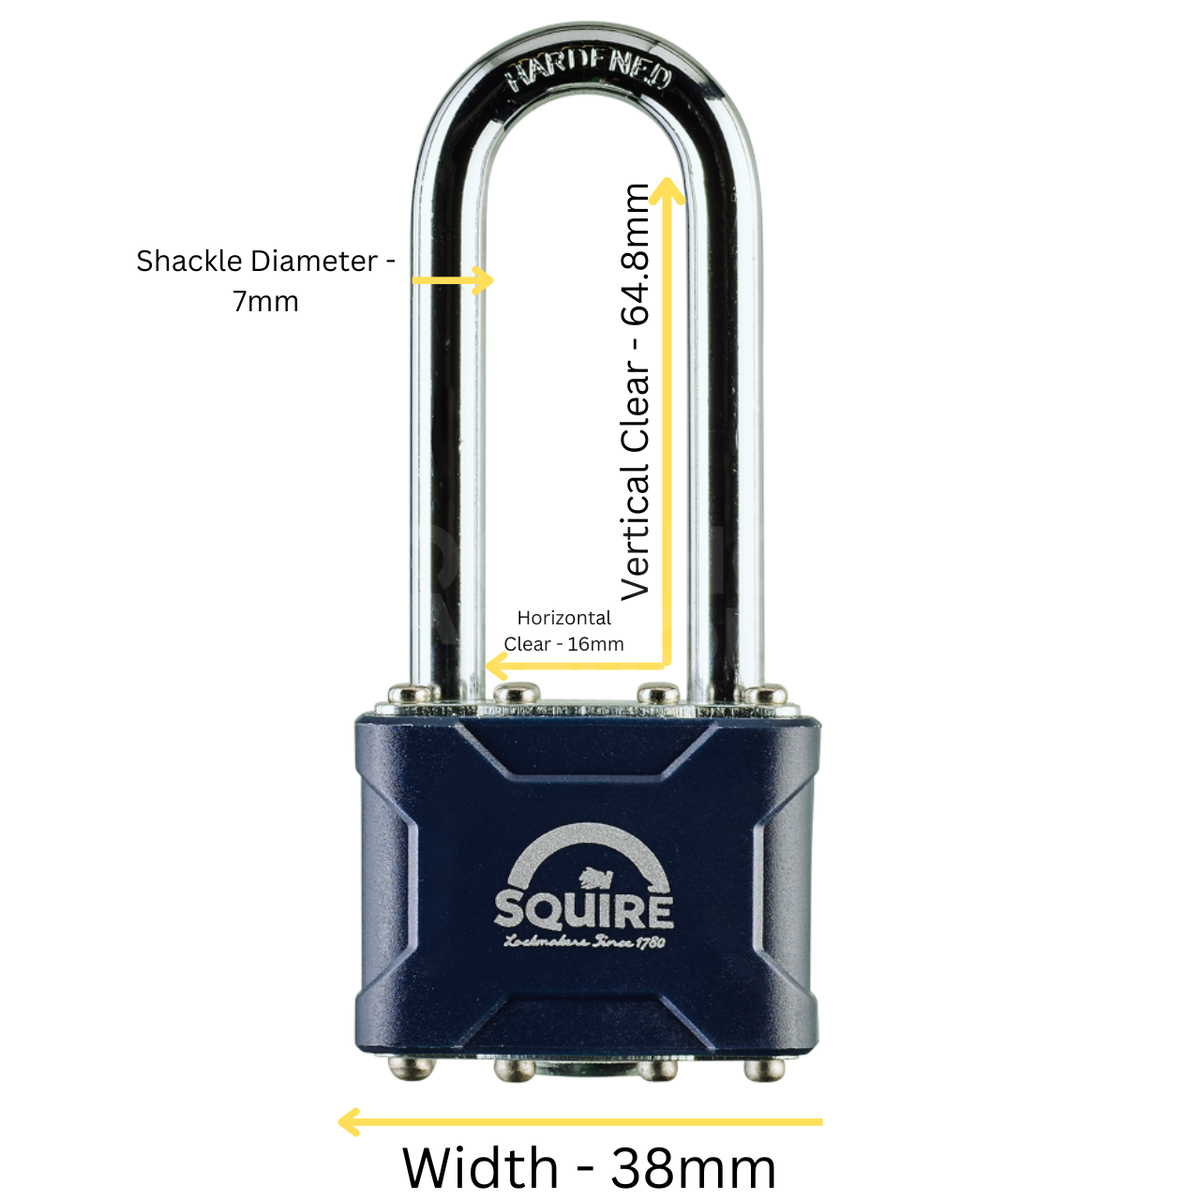 Dimensions Image: Squire Stronglock 35 - 2.5" Long Shackle Padlock